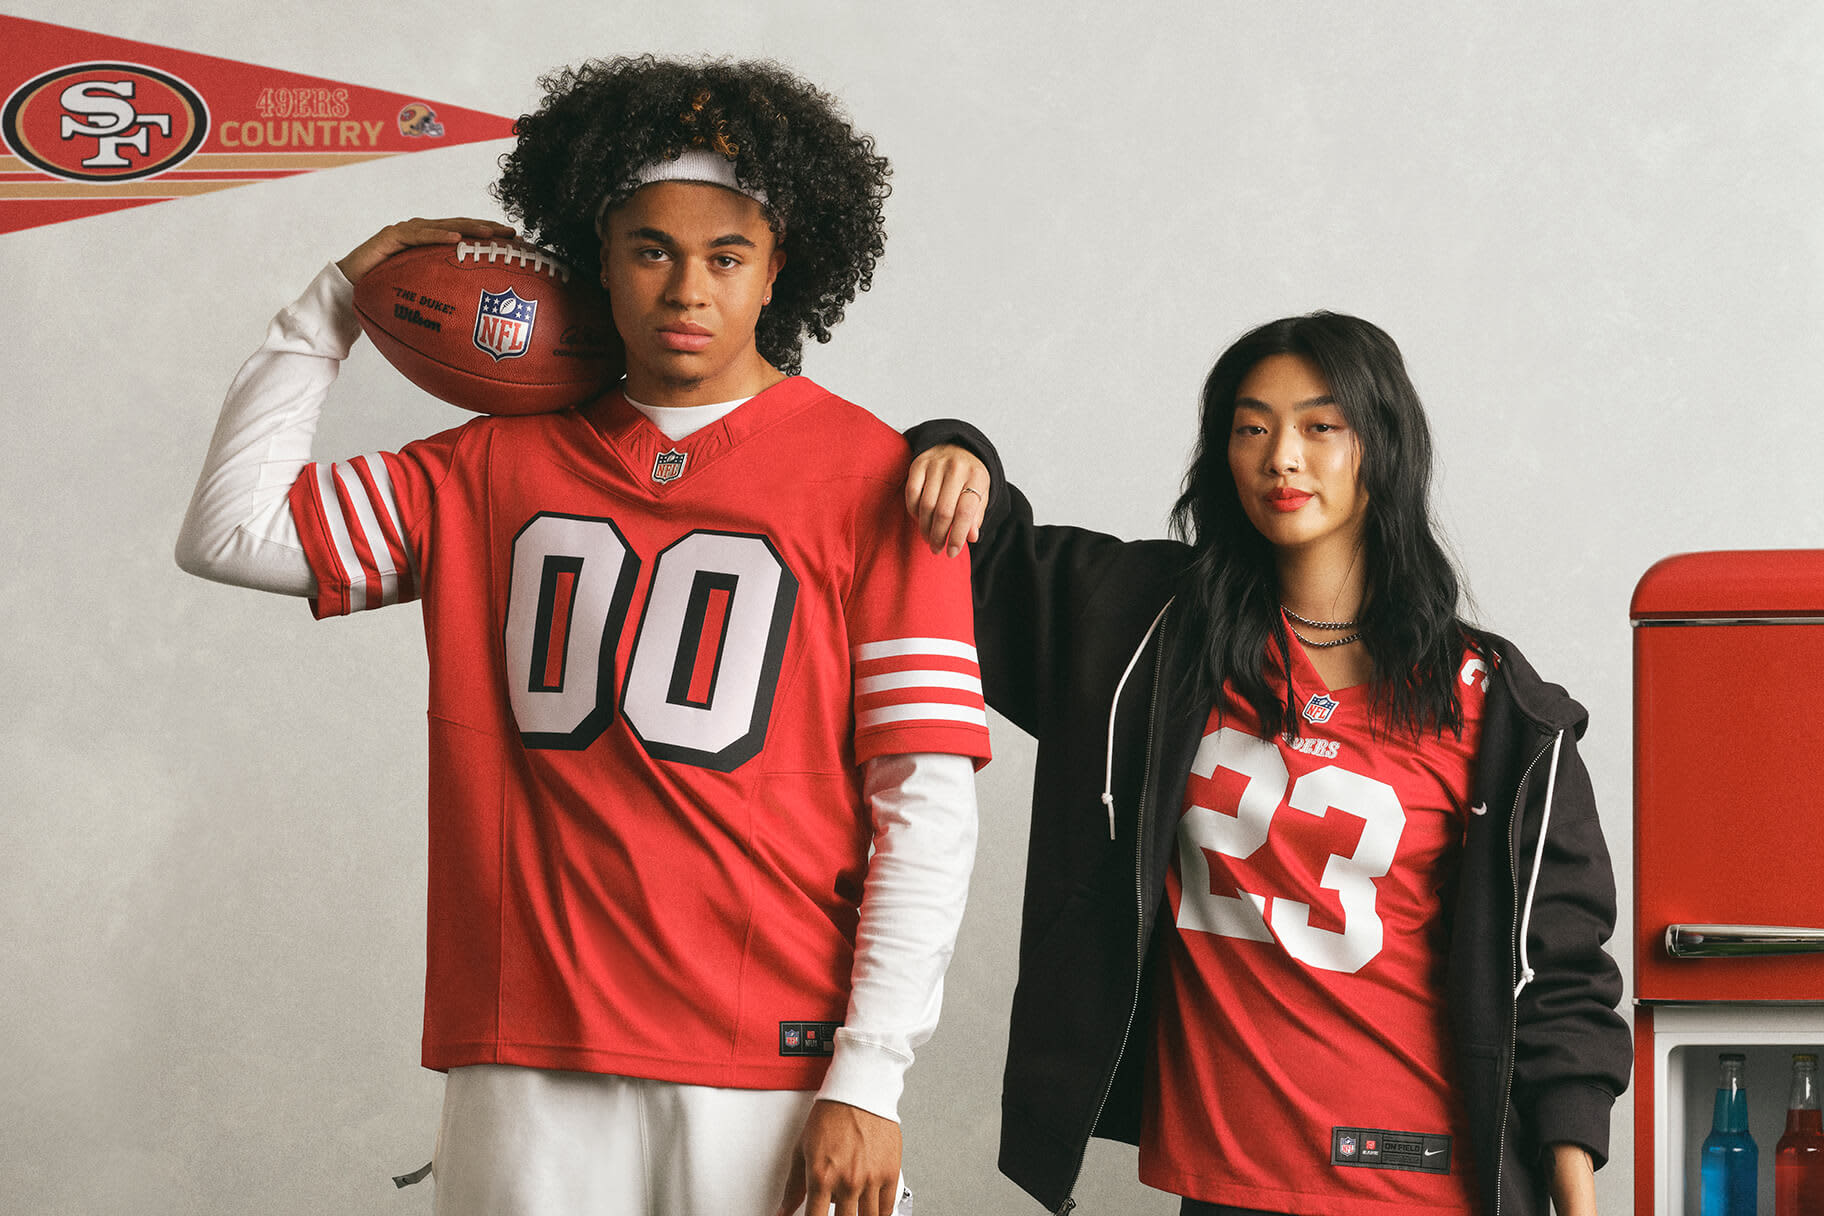 8 Nike Outfit Essentials to Wear to a Football Game